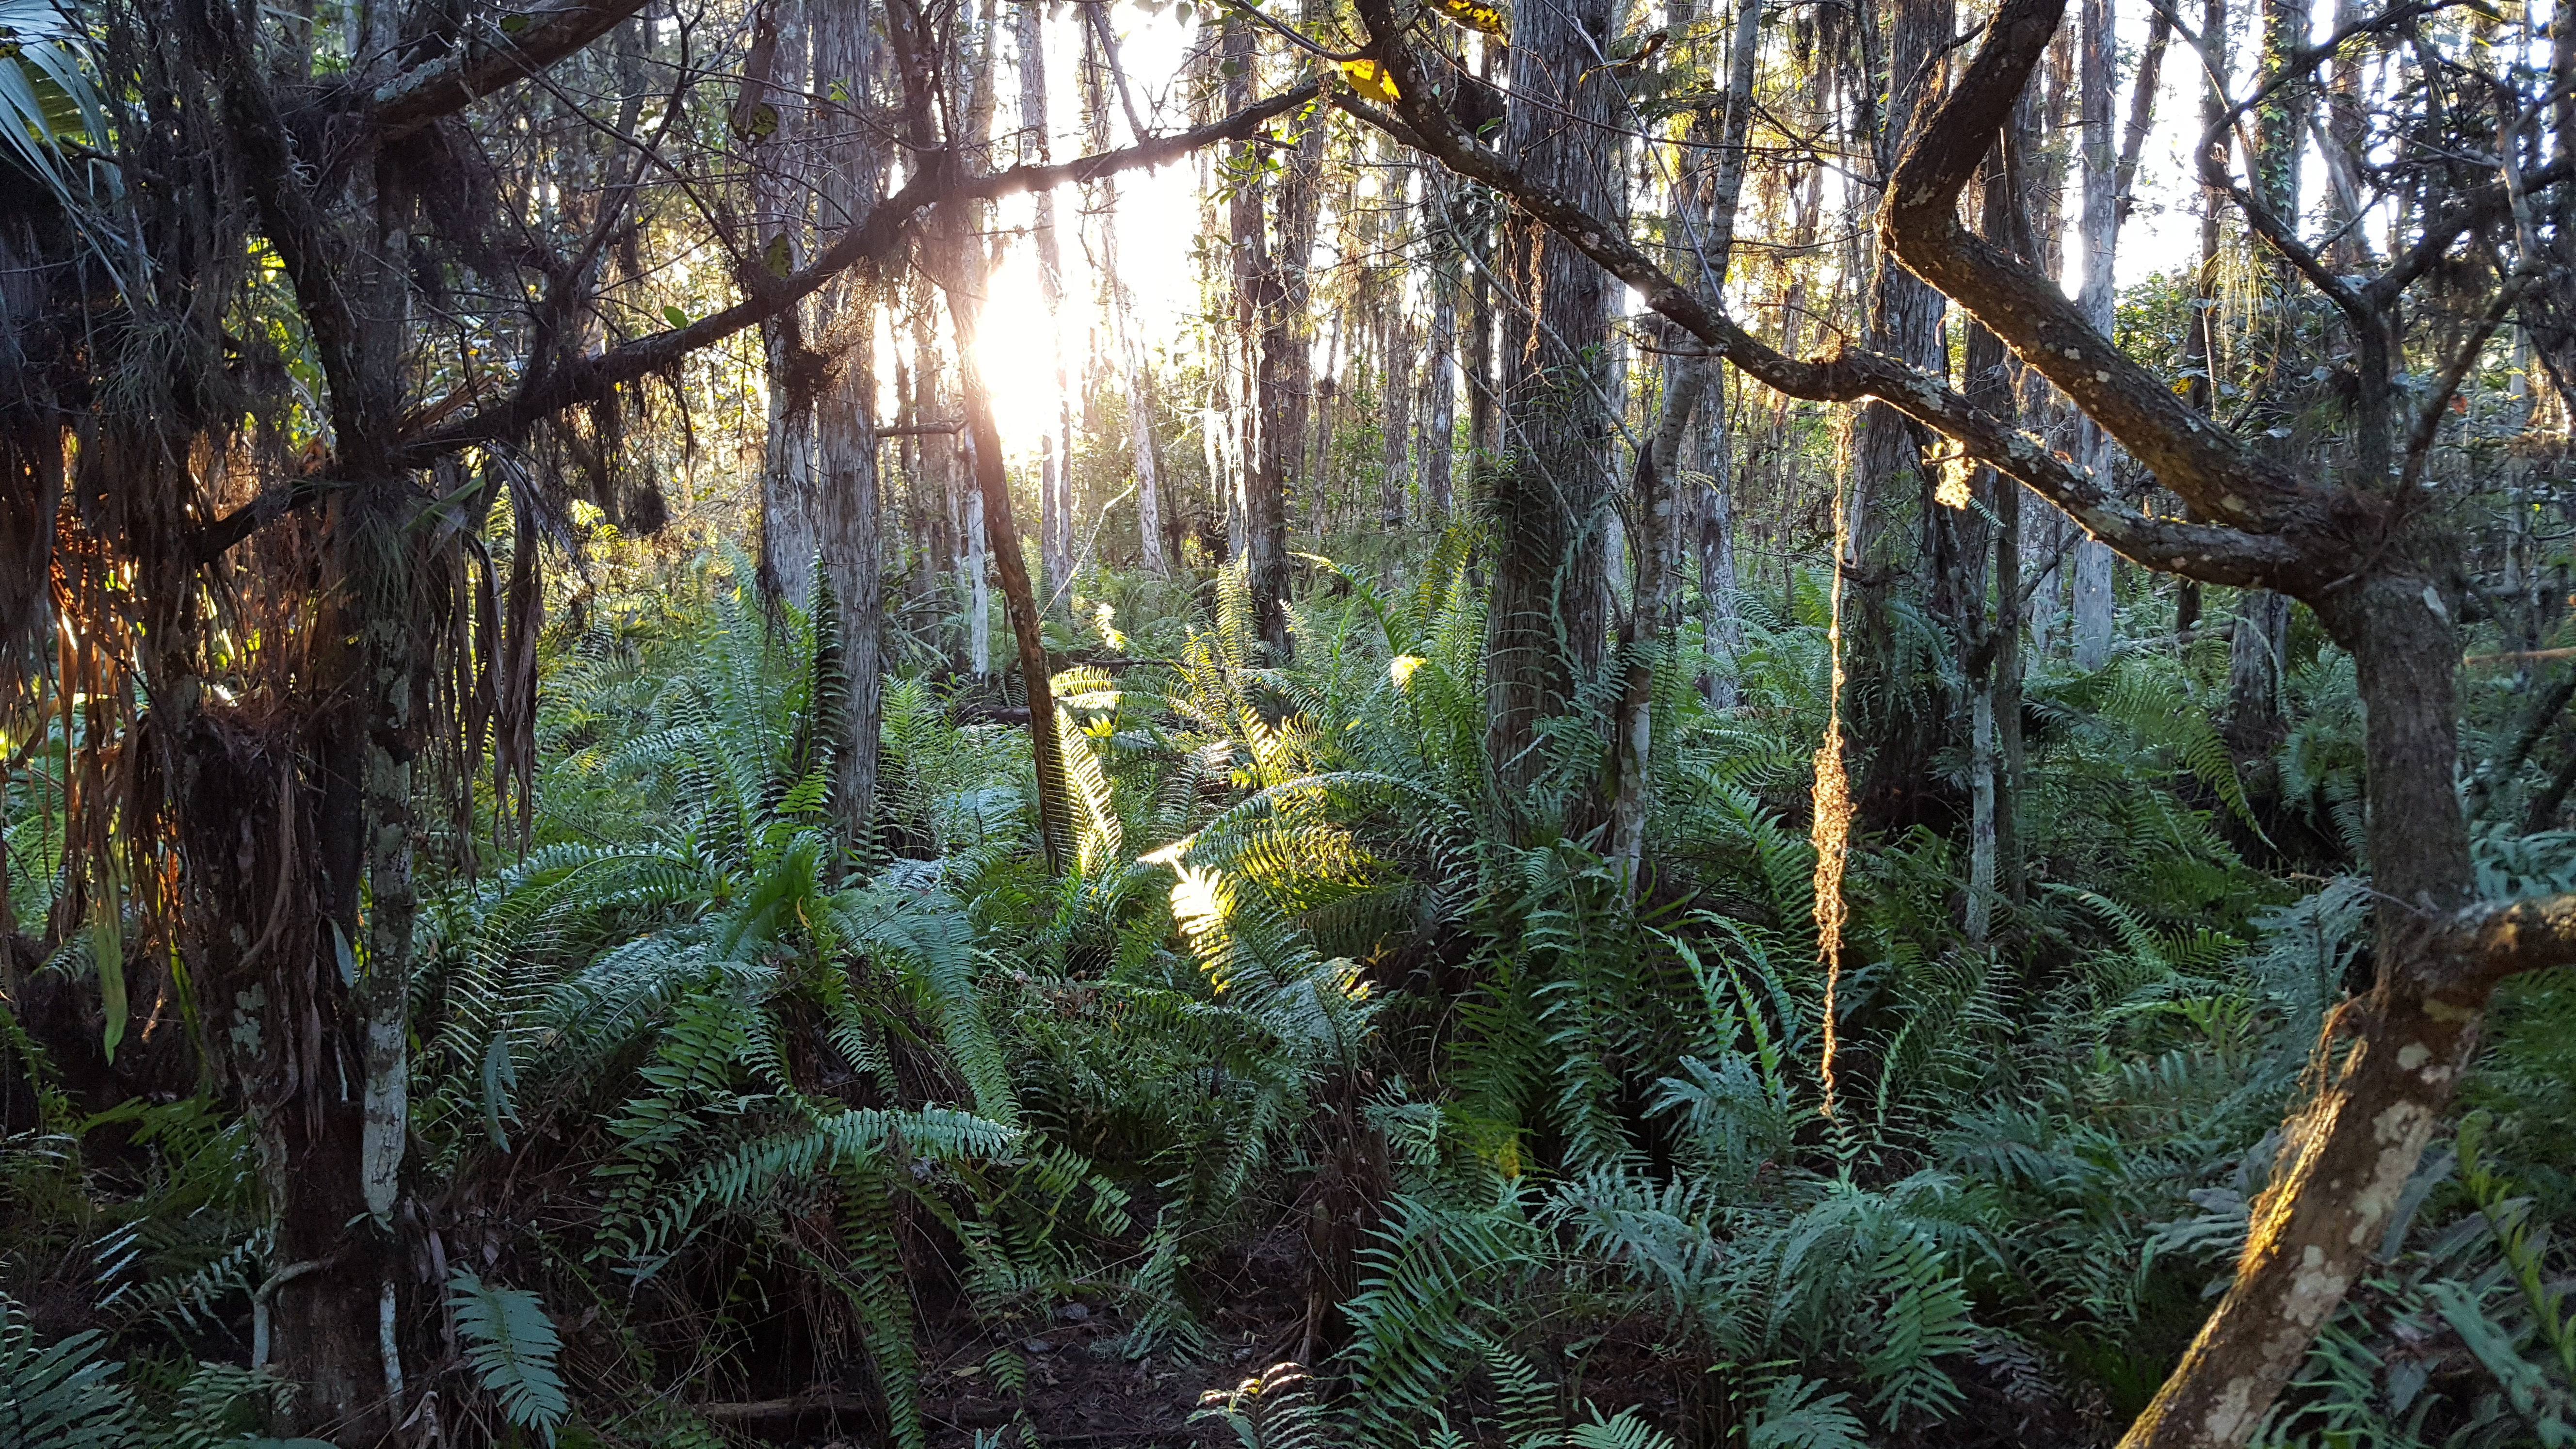 The sunset casts rays of light that dance off of green ferns and cypress trees.